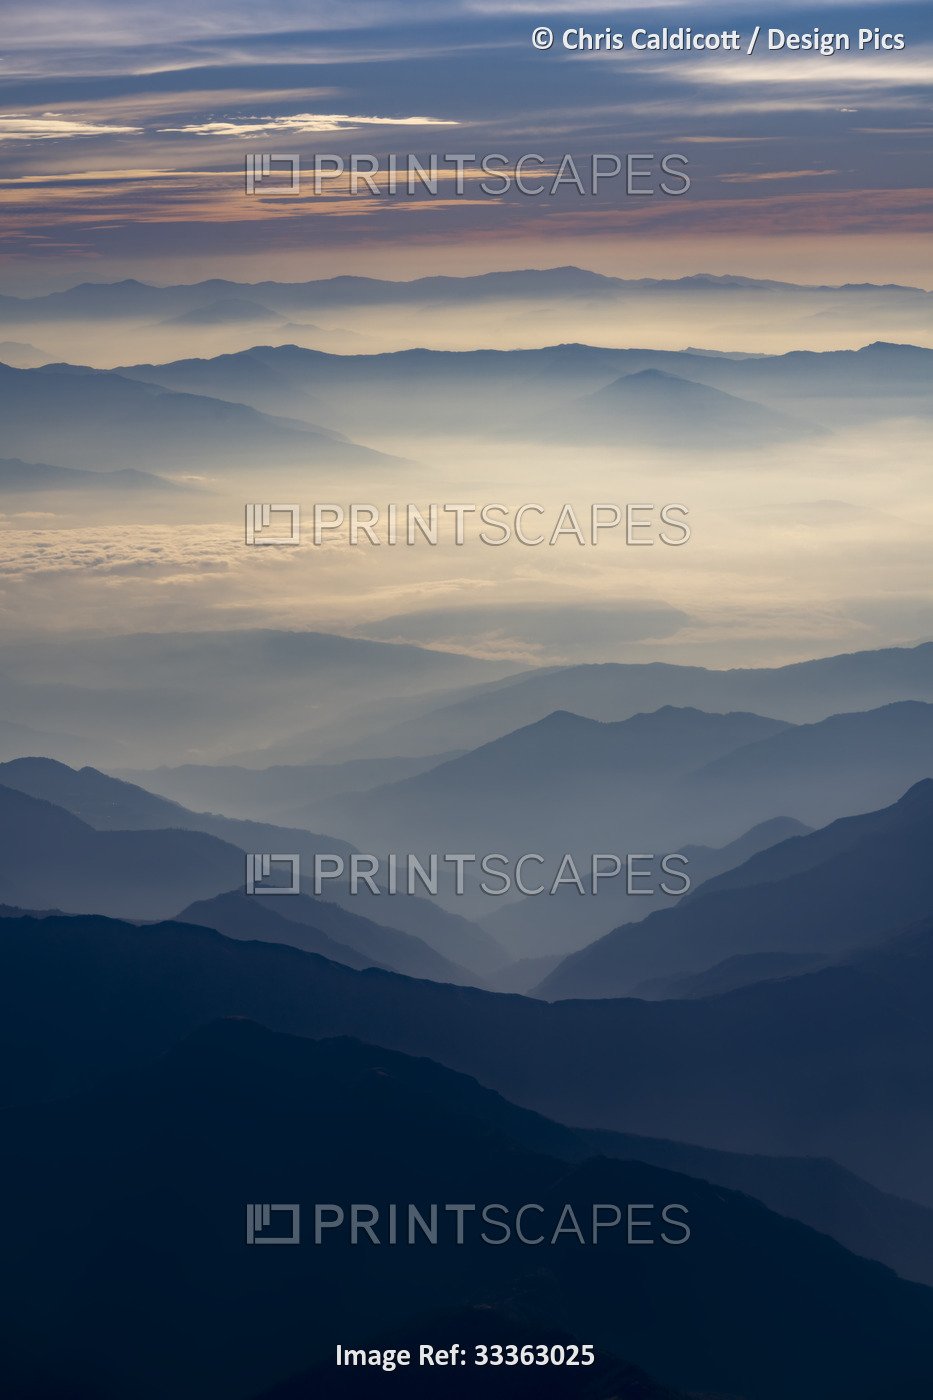 View of the Himalayan foothills from window on Dawn Kathmandu to Everest Flight ...